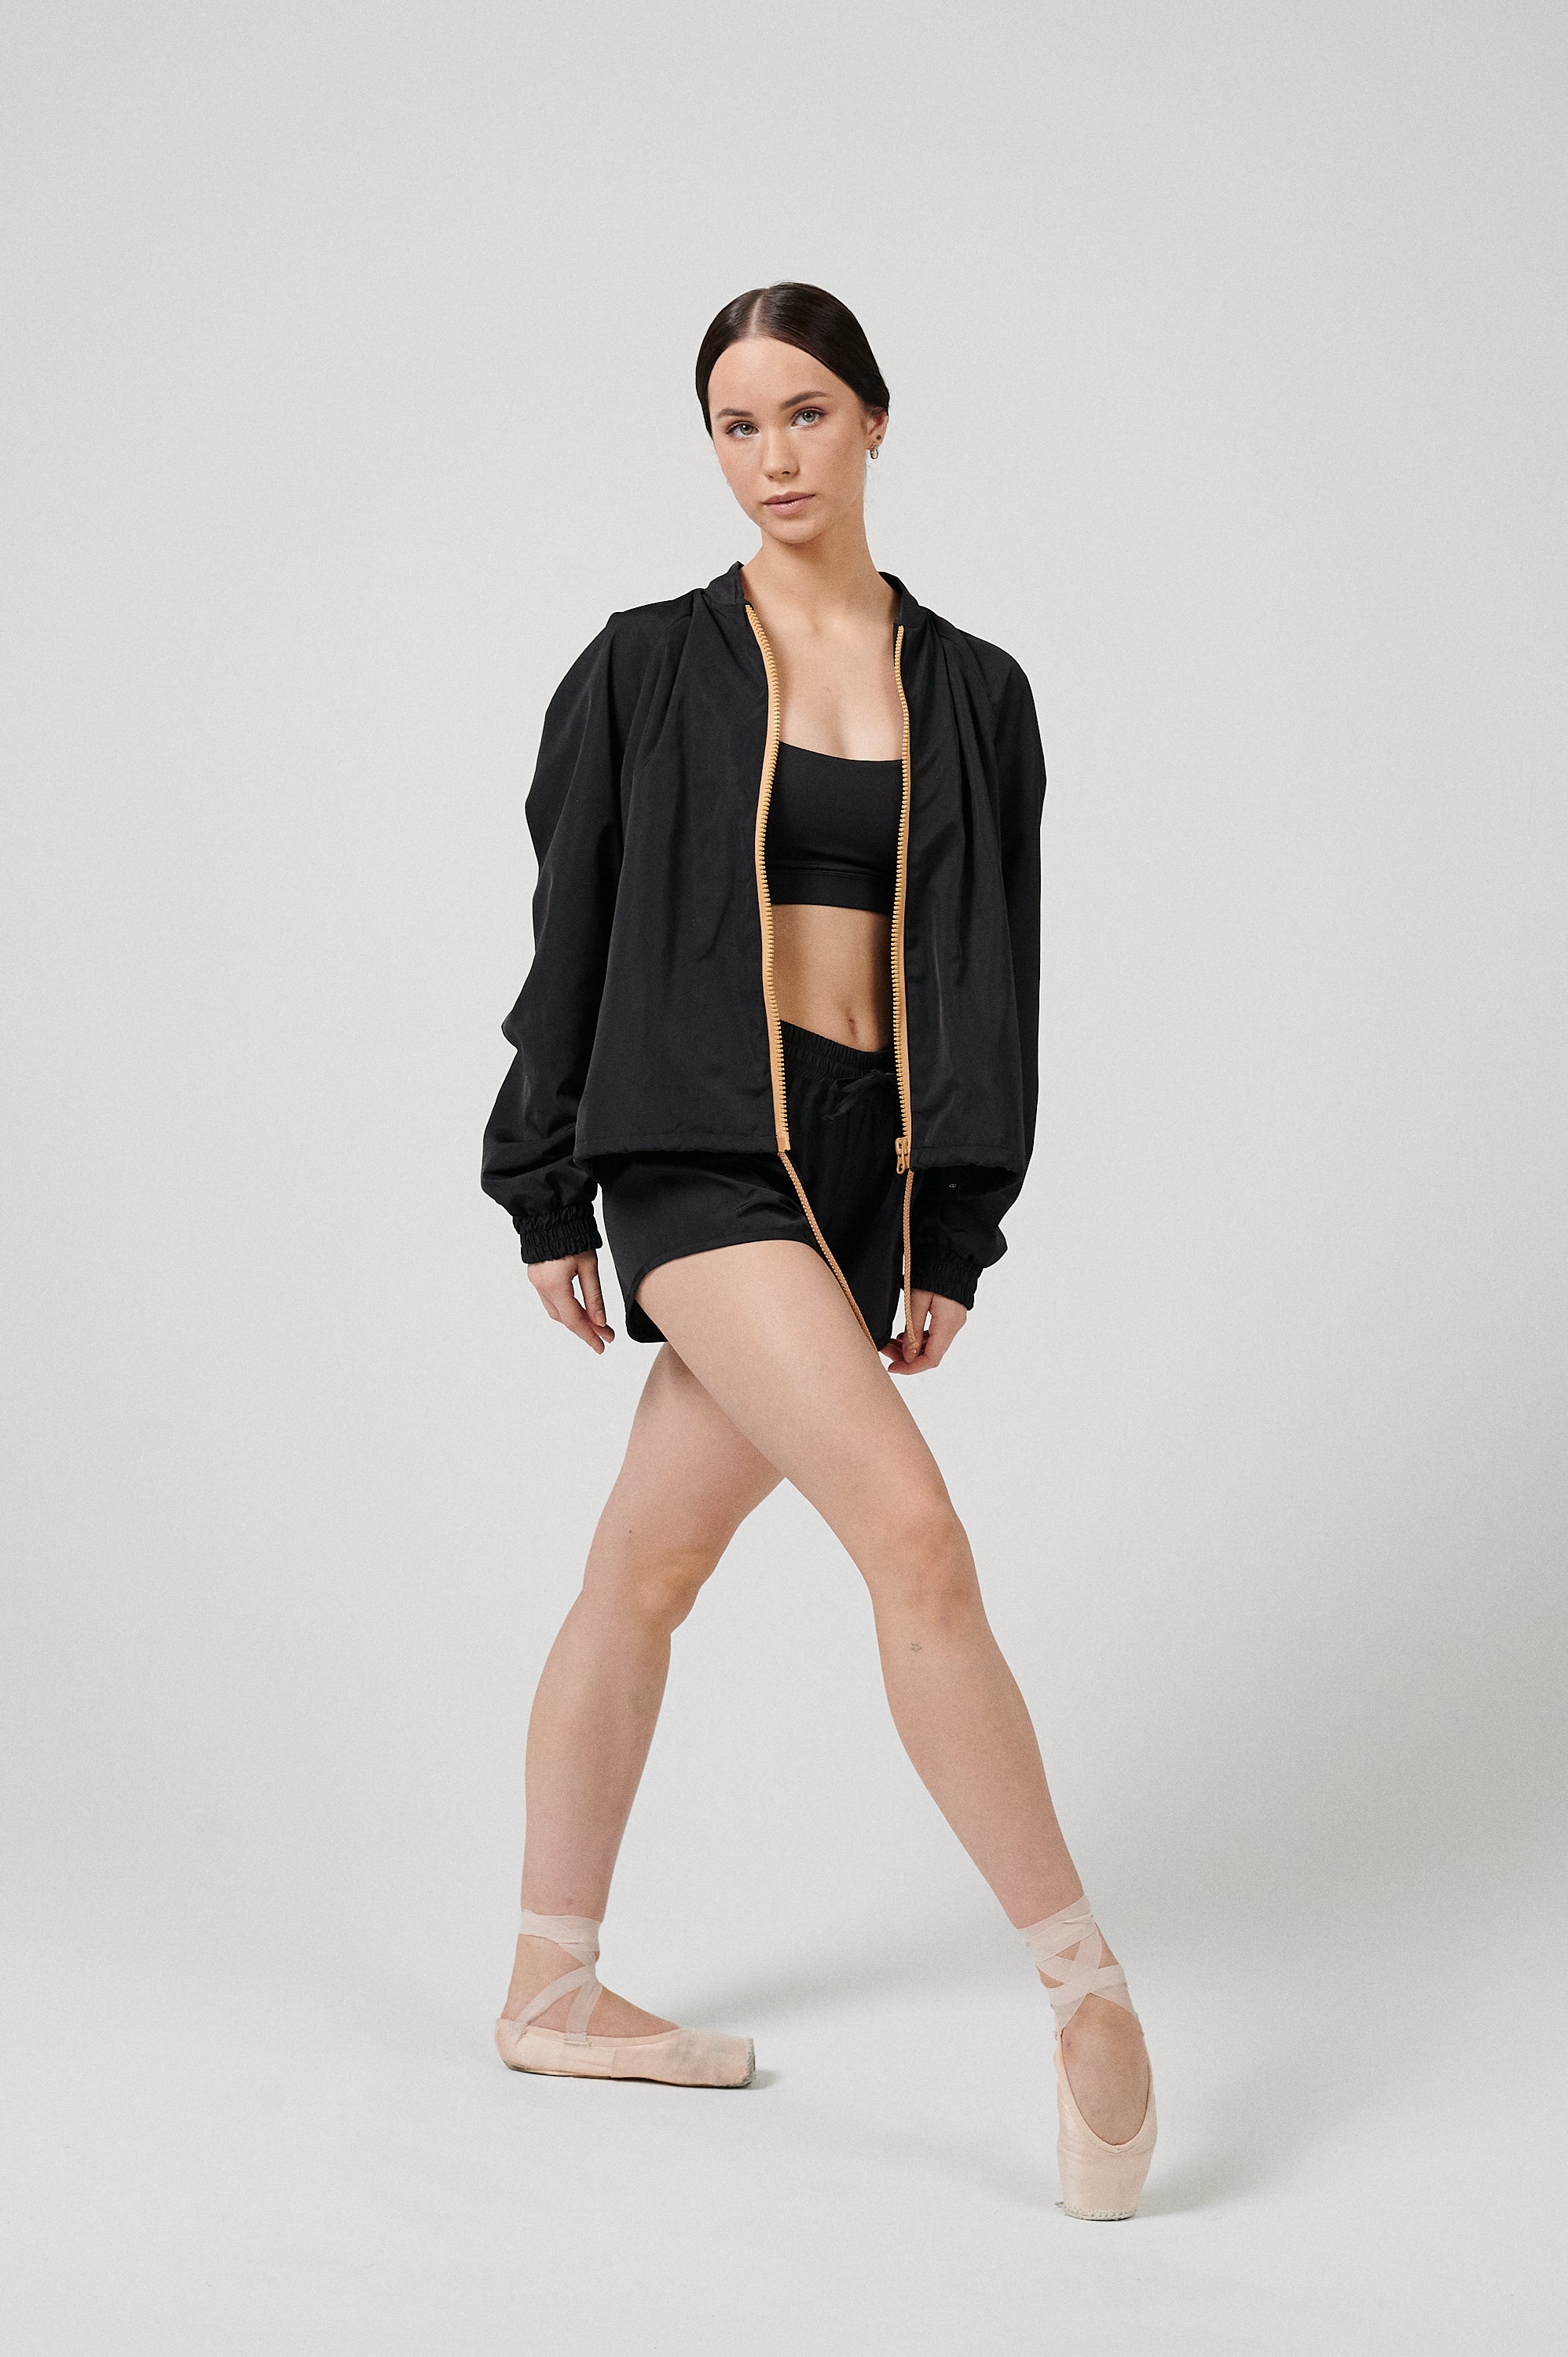 Bosaddo by Jurgita Dronina collection | Black sports suit with shorts